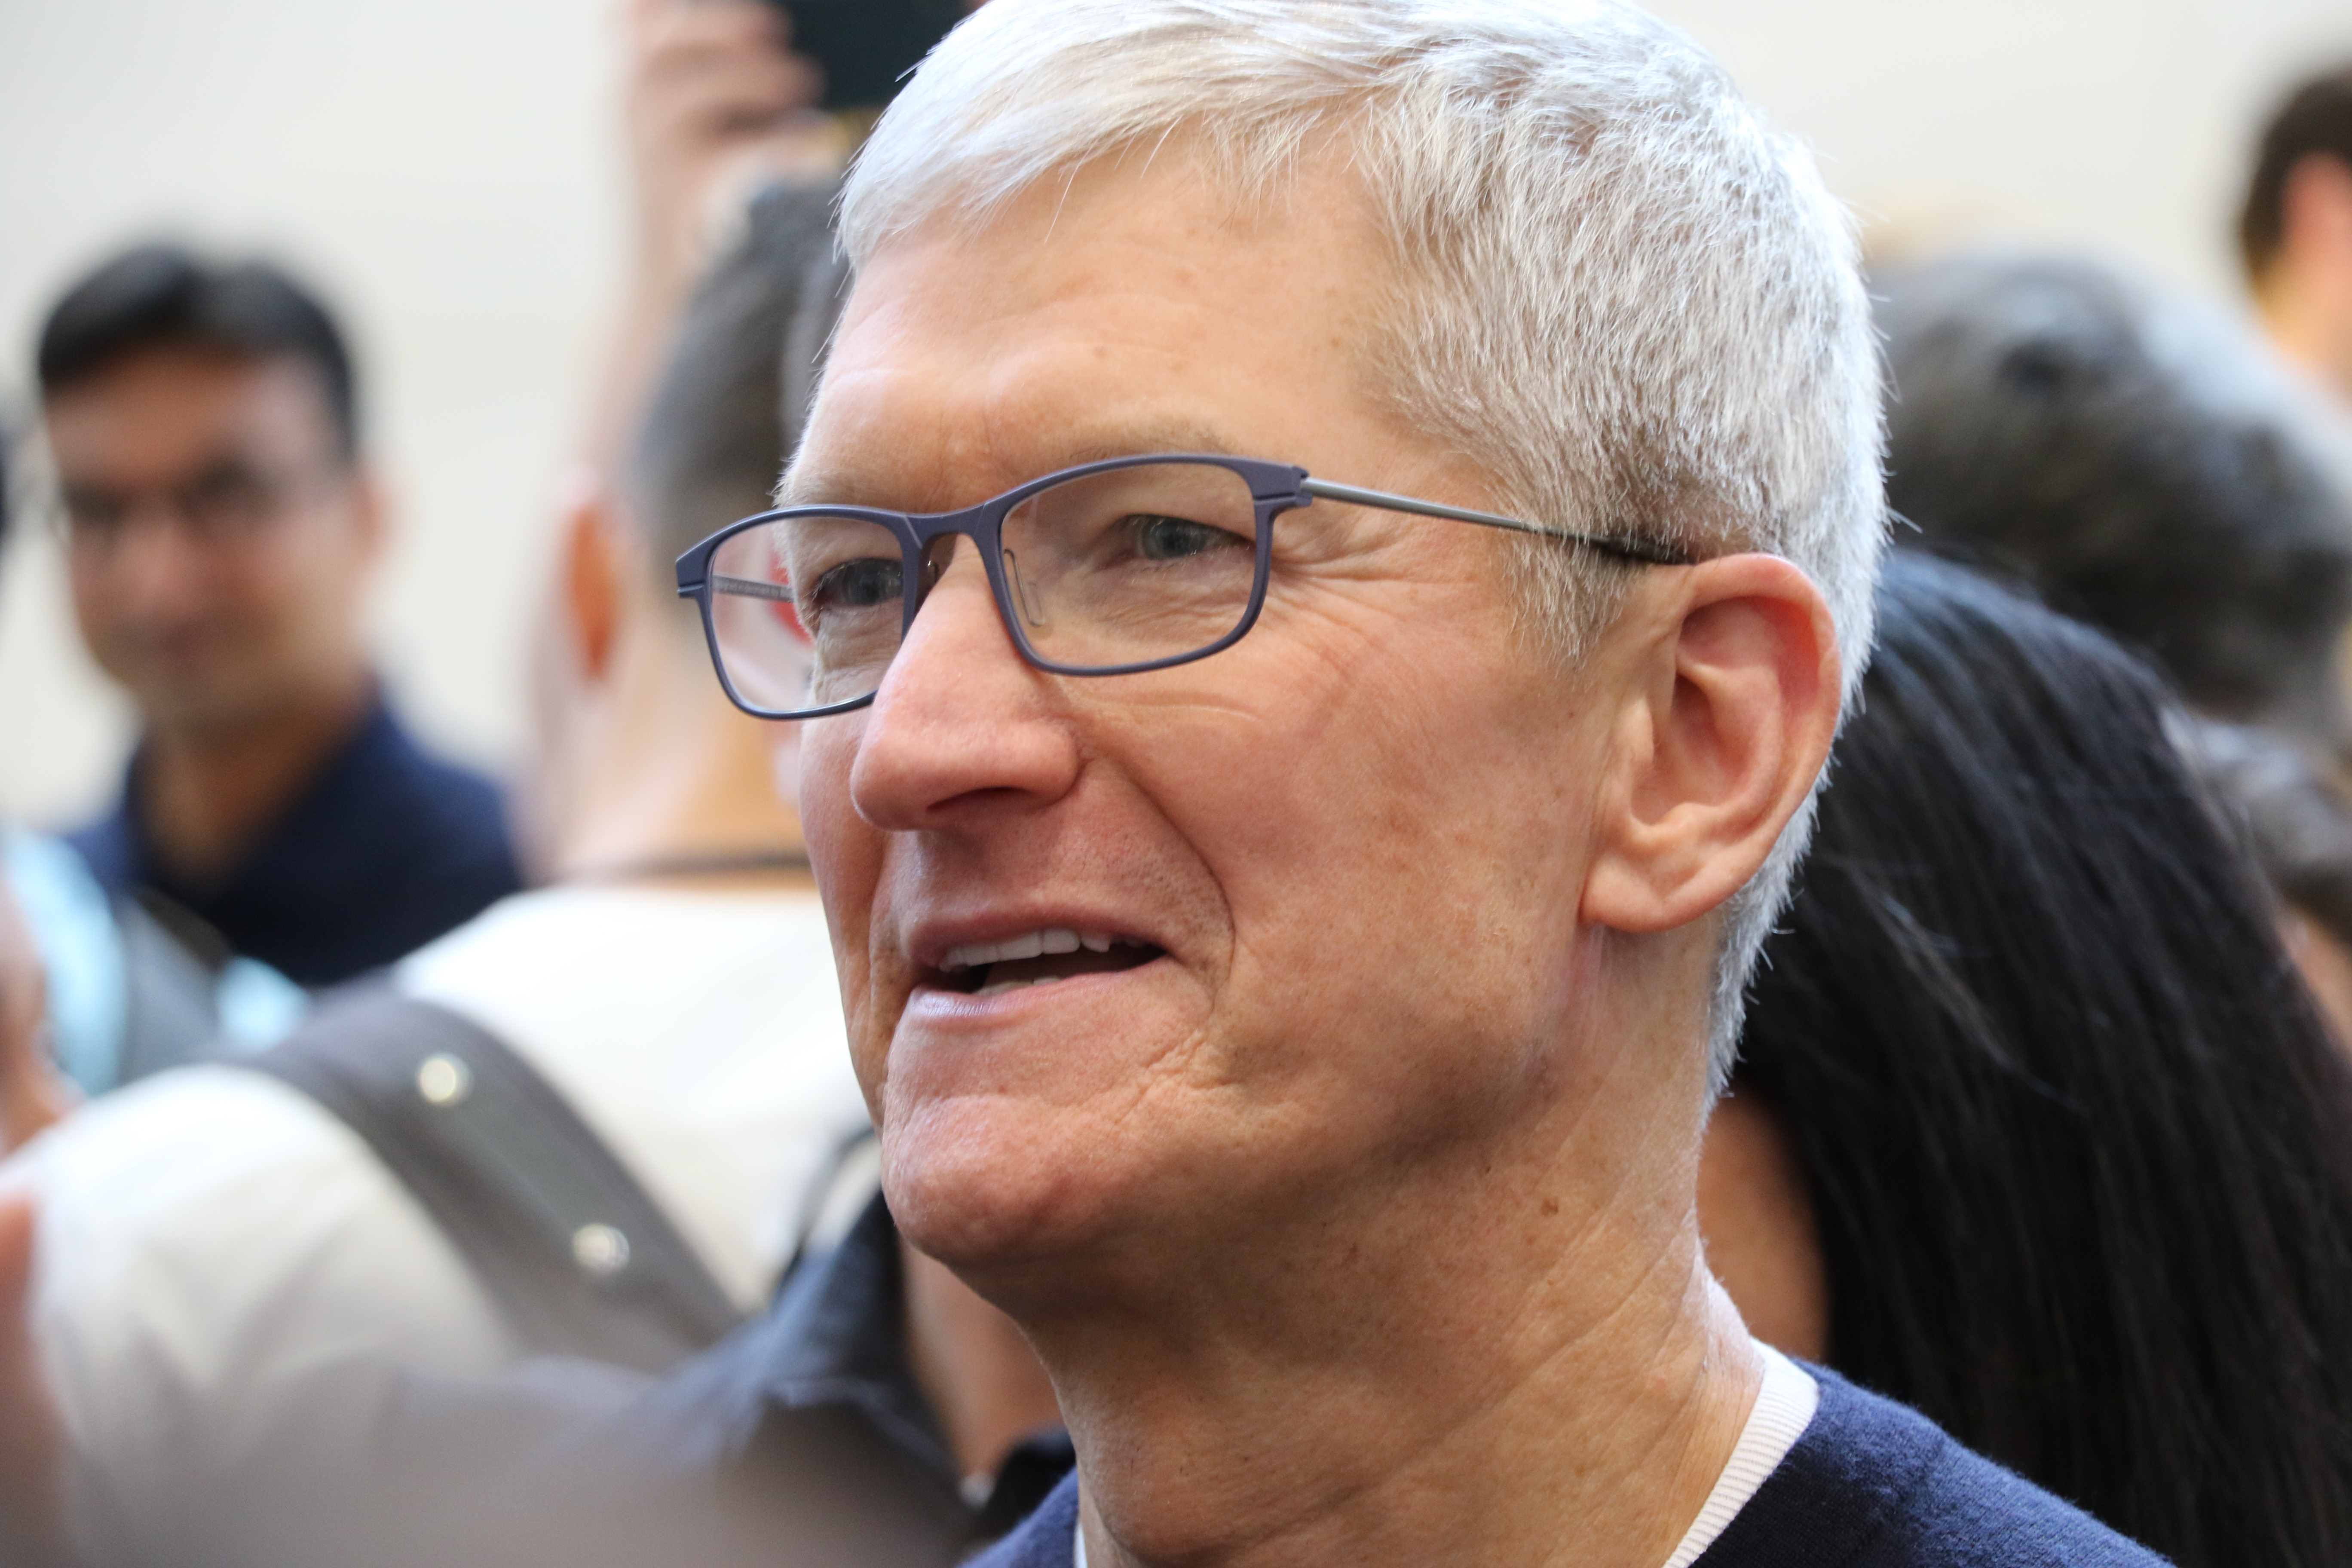 Just weeks after returning to the office, many Apple workers are unhappy and ready to quit